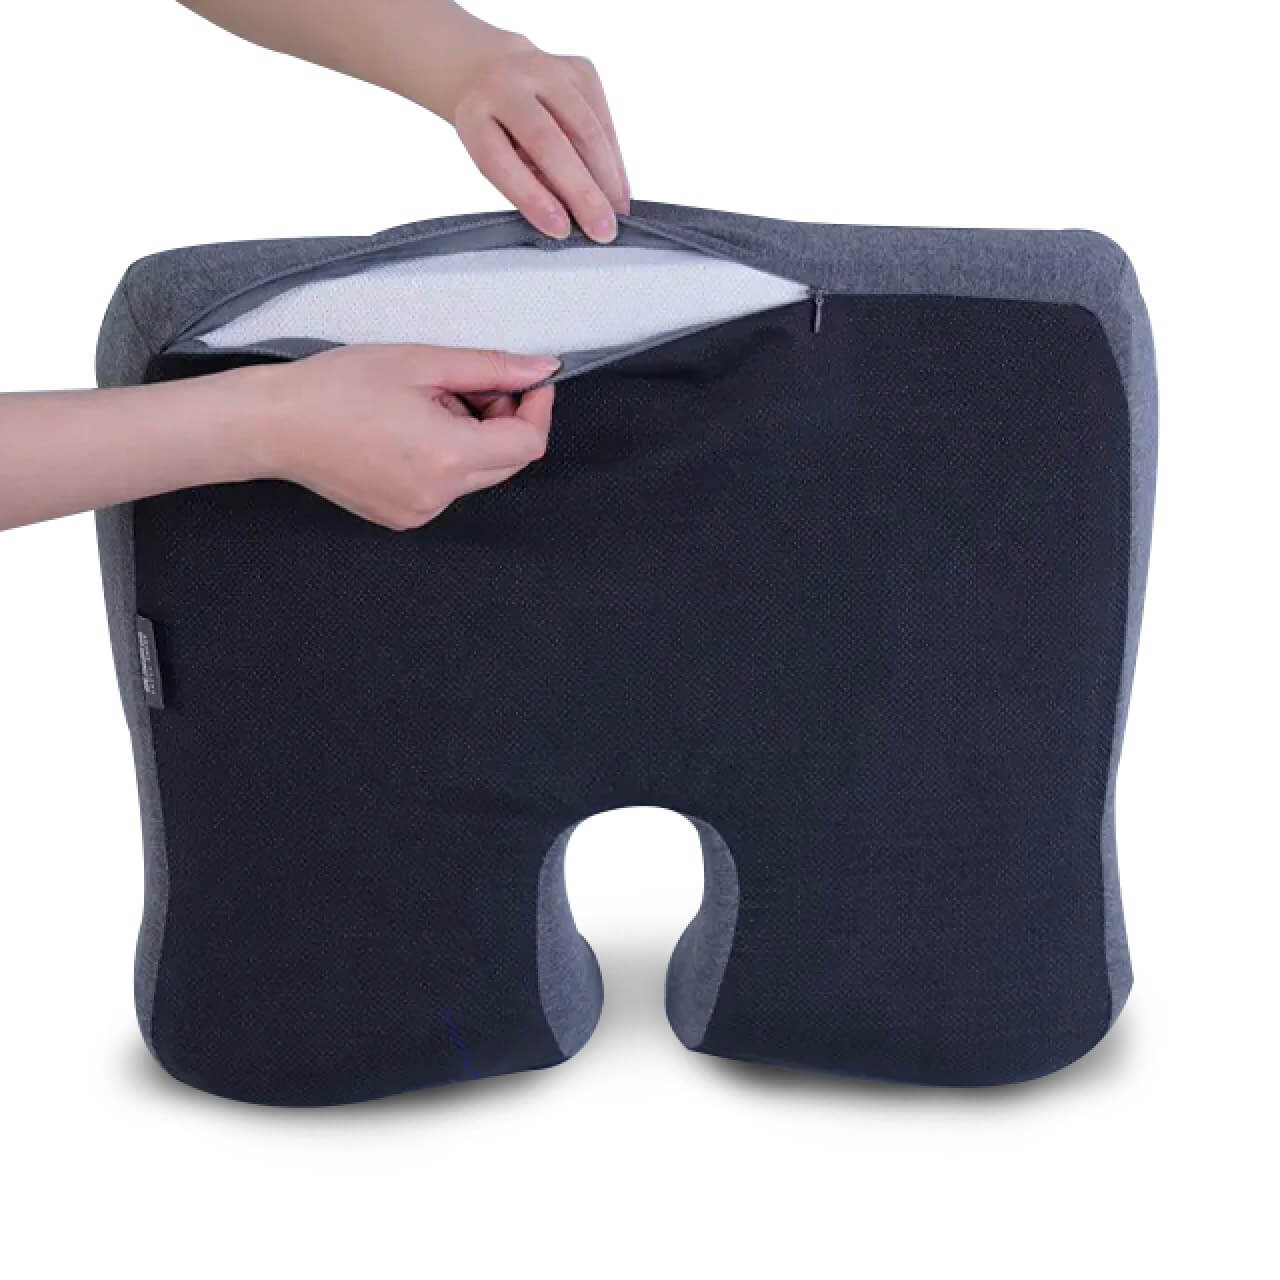 Seat Cushions - Neck Solutions